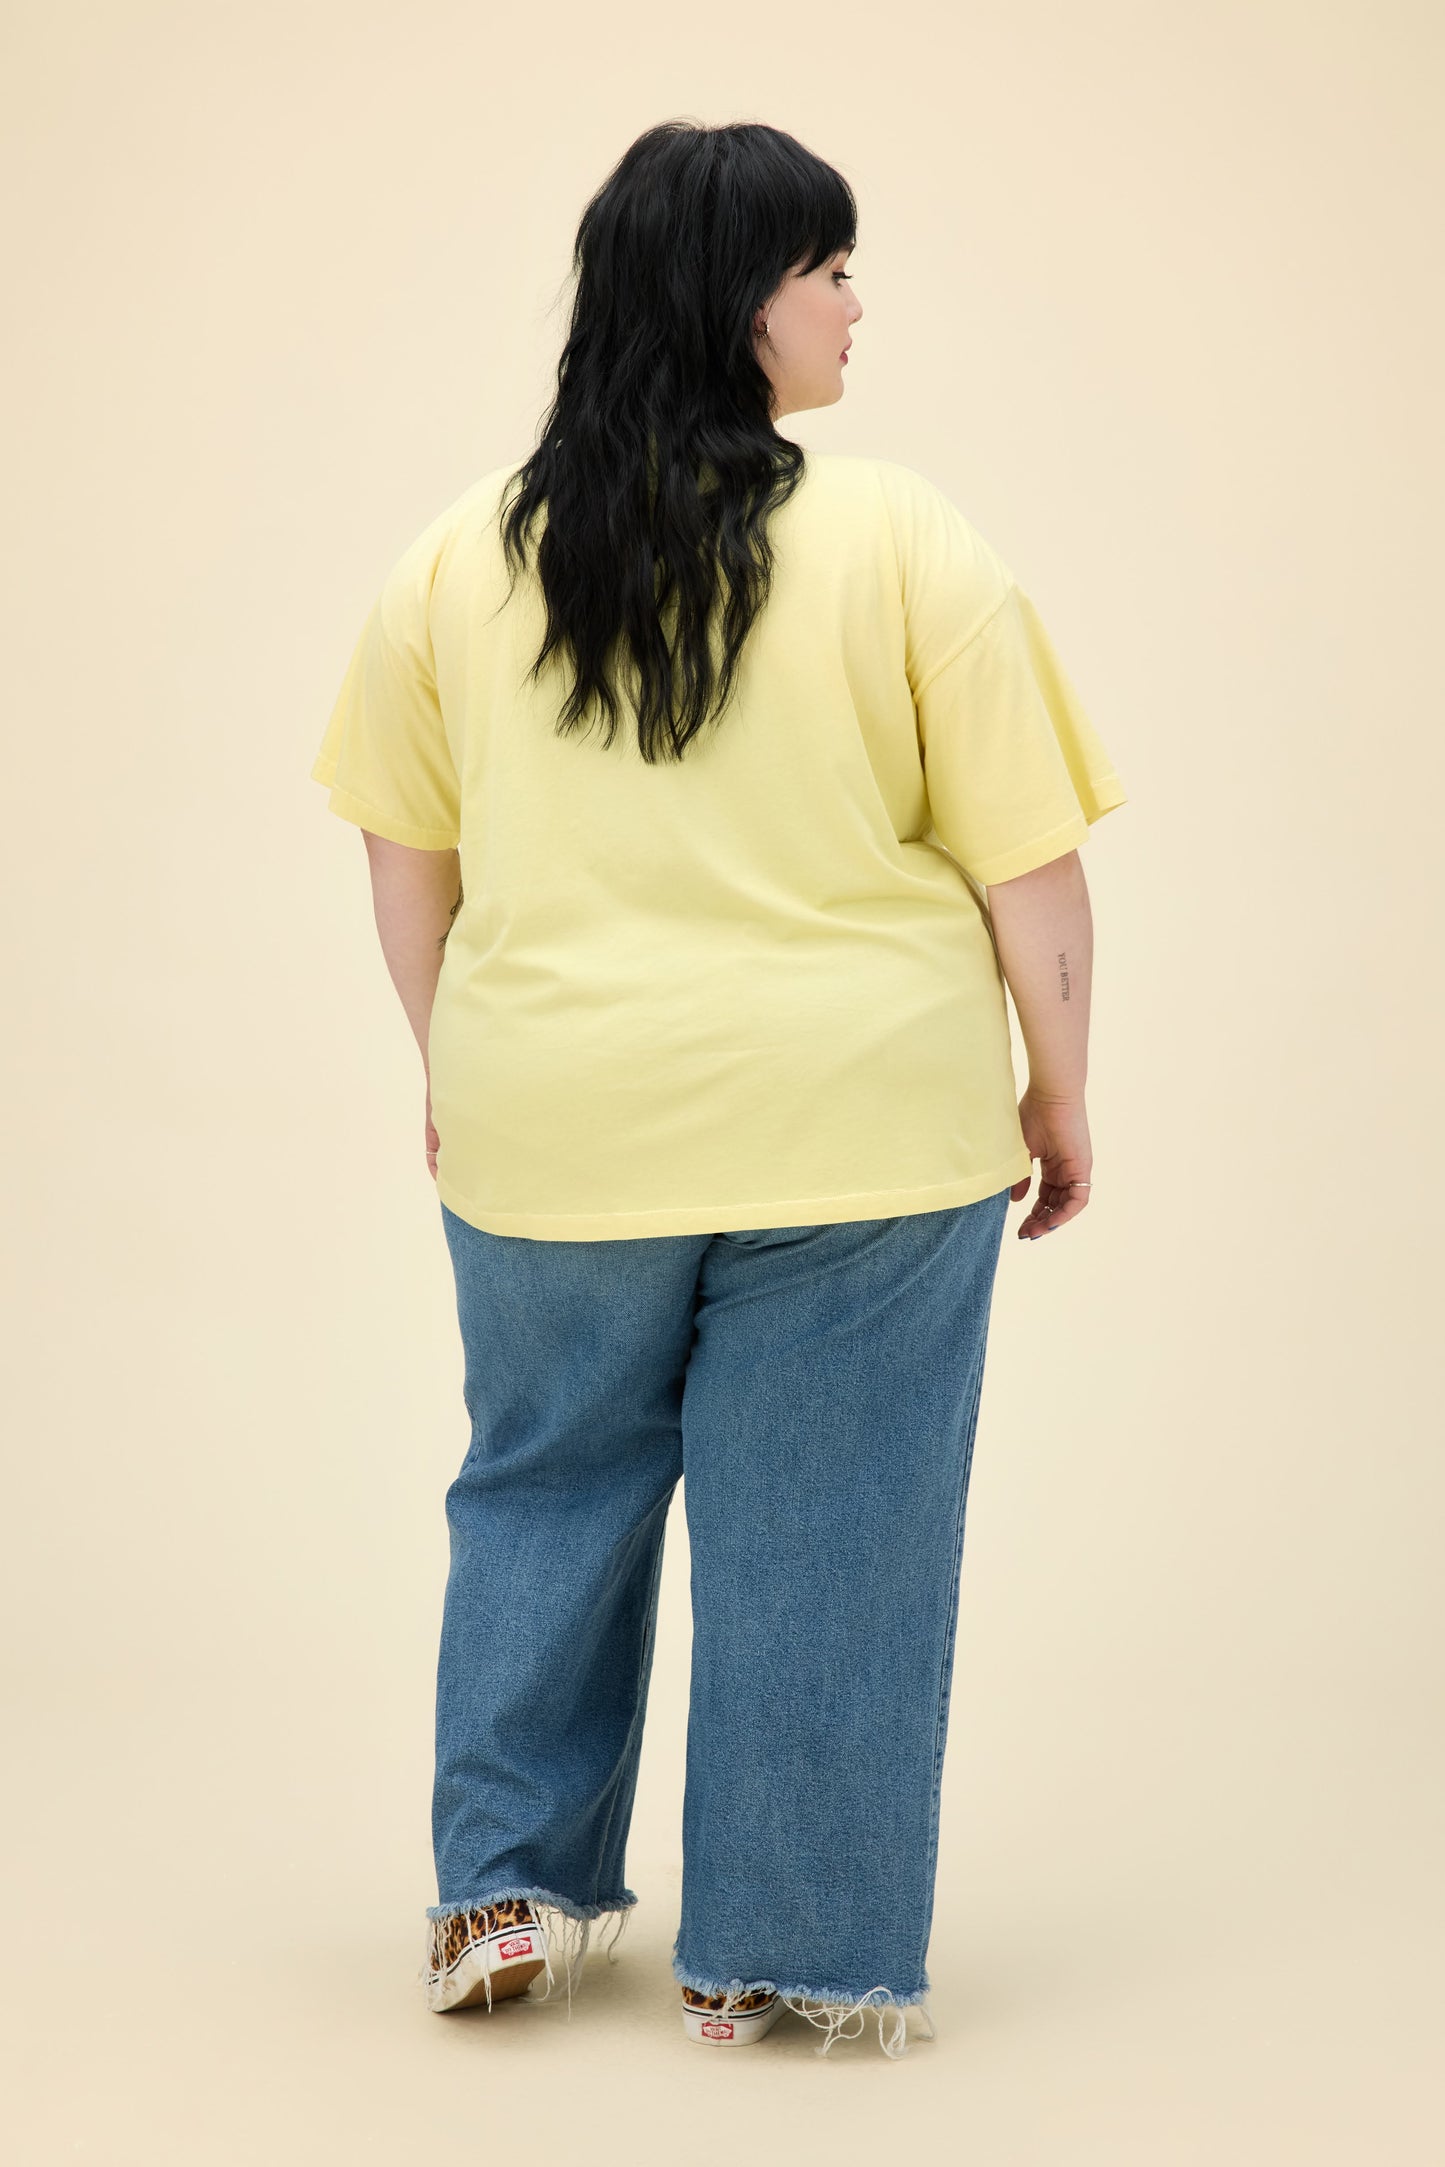 A model featuring a plus size yellow mist colored merch tee stamped with Nirvana's Utero album cover.